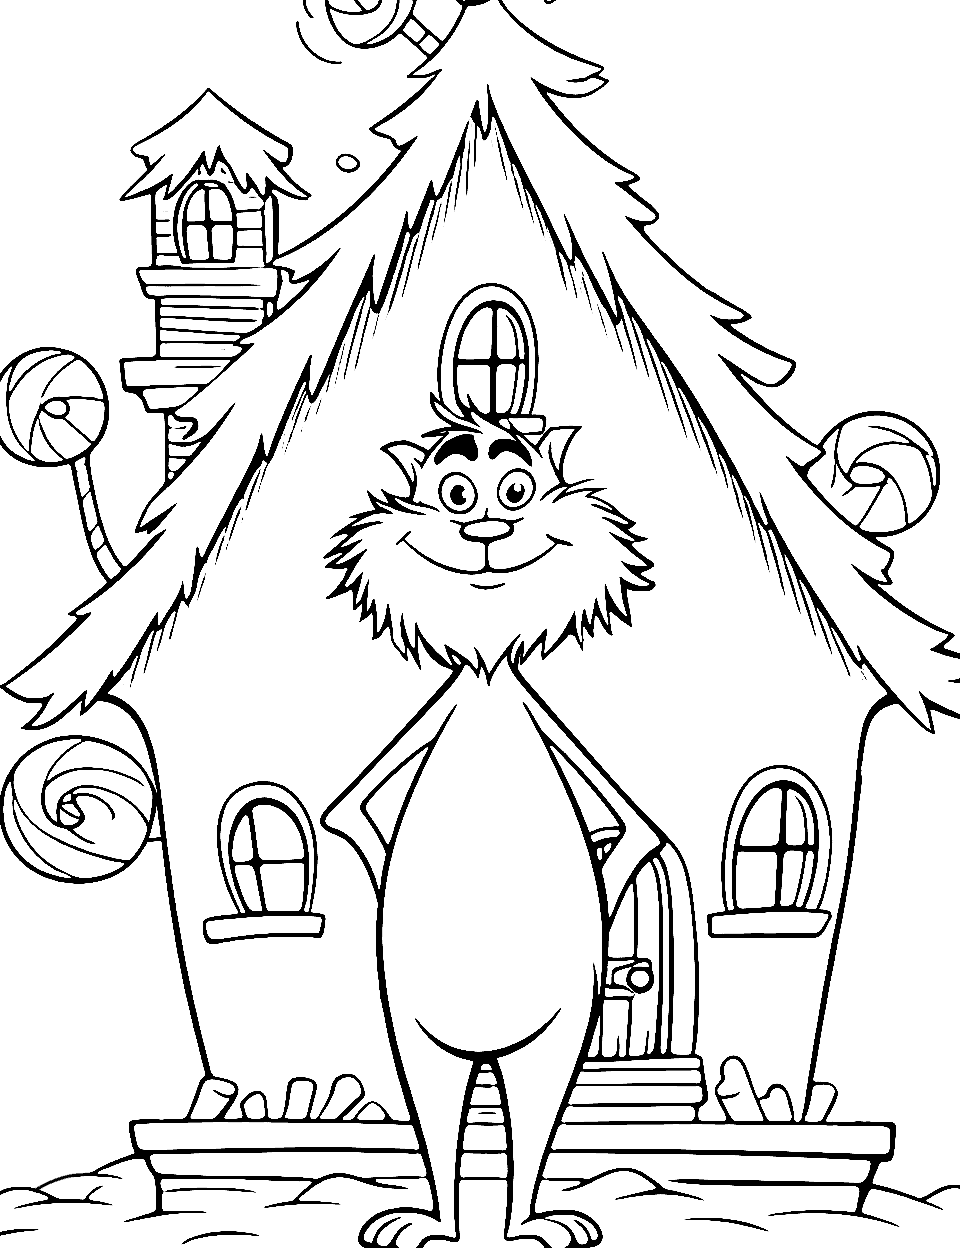 Gingerbread House Coloring Page - The Grinch in front of a gingerbread house with made with candies.